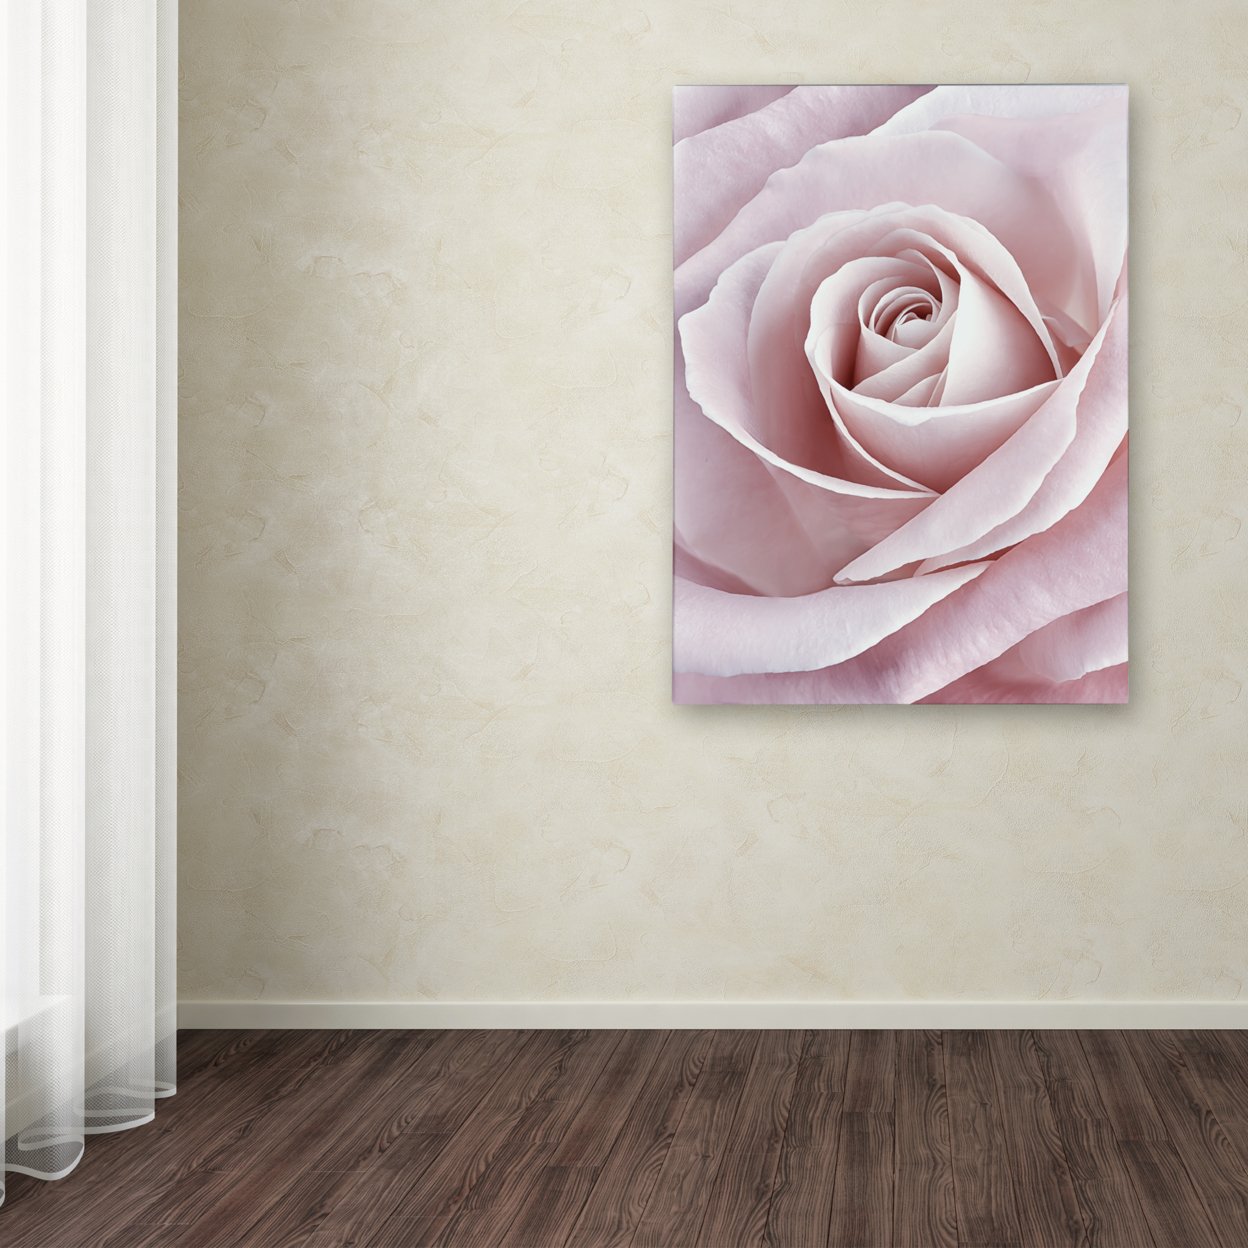 Cora Niele 'Pink Rose' Canvas Wall Art 35 X 47 Inches